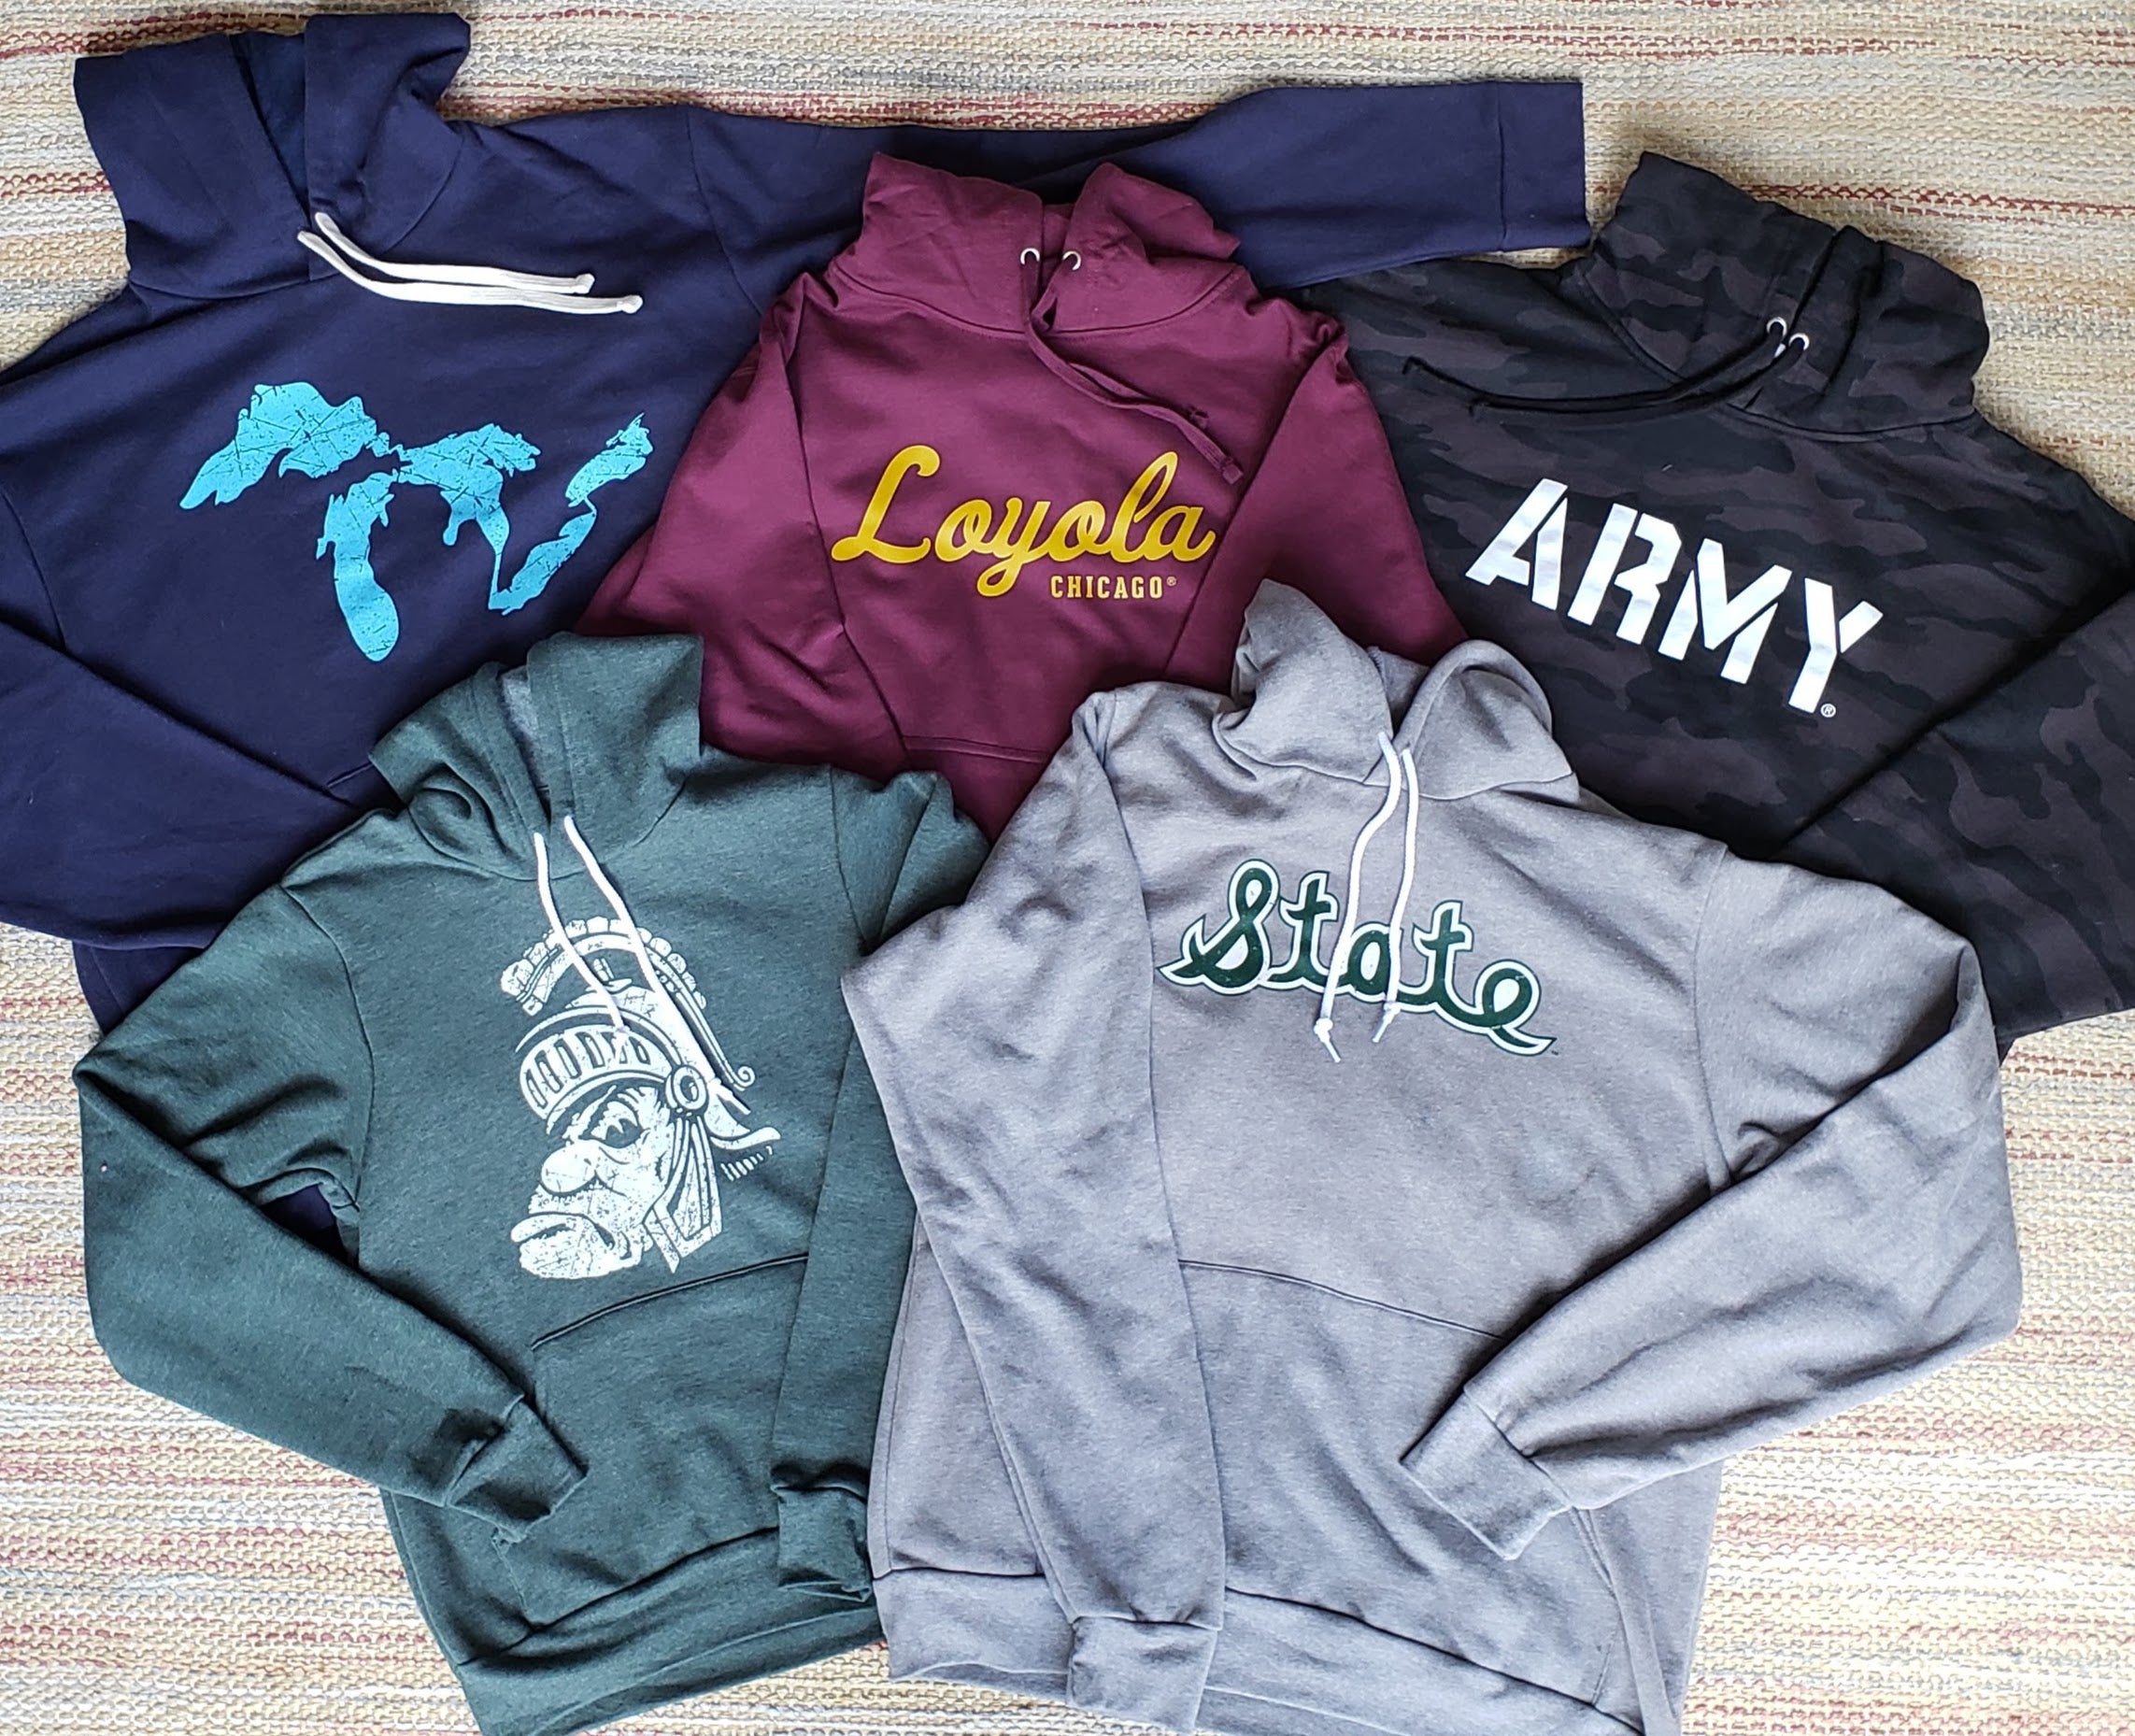 Introducing Our New Collection of Hoodies